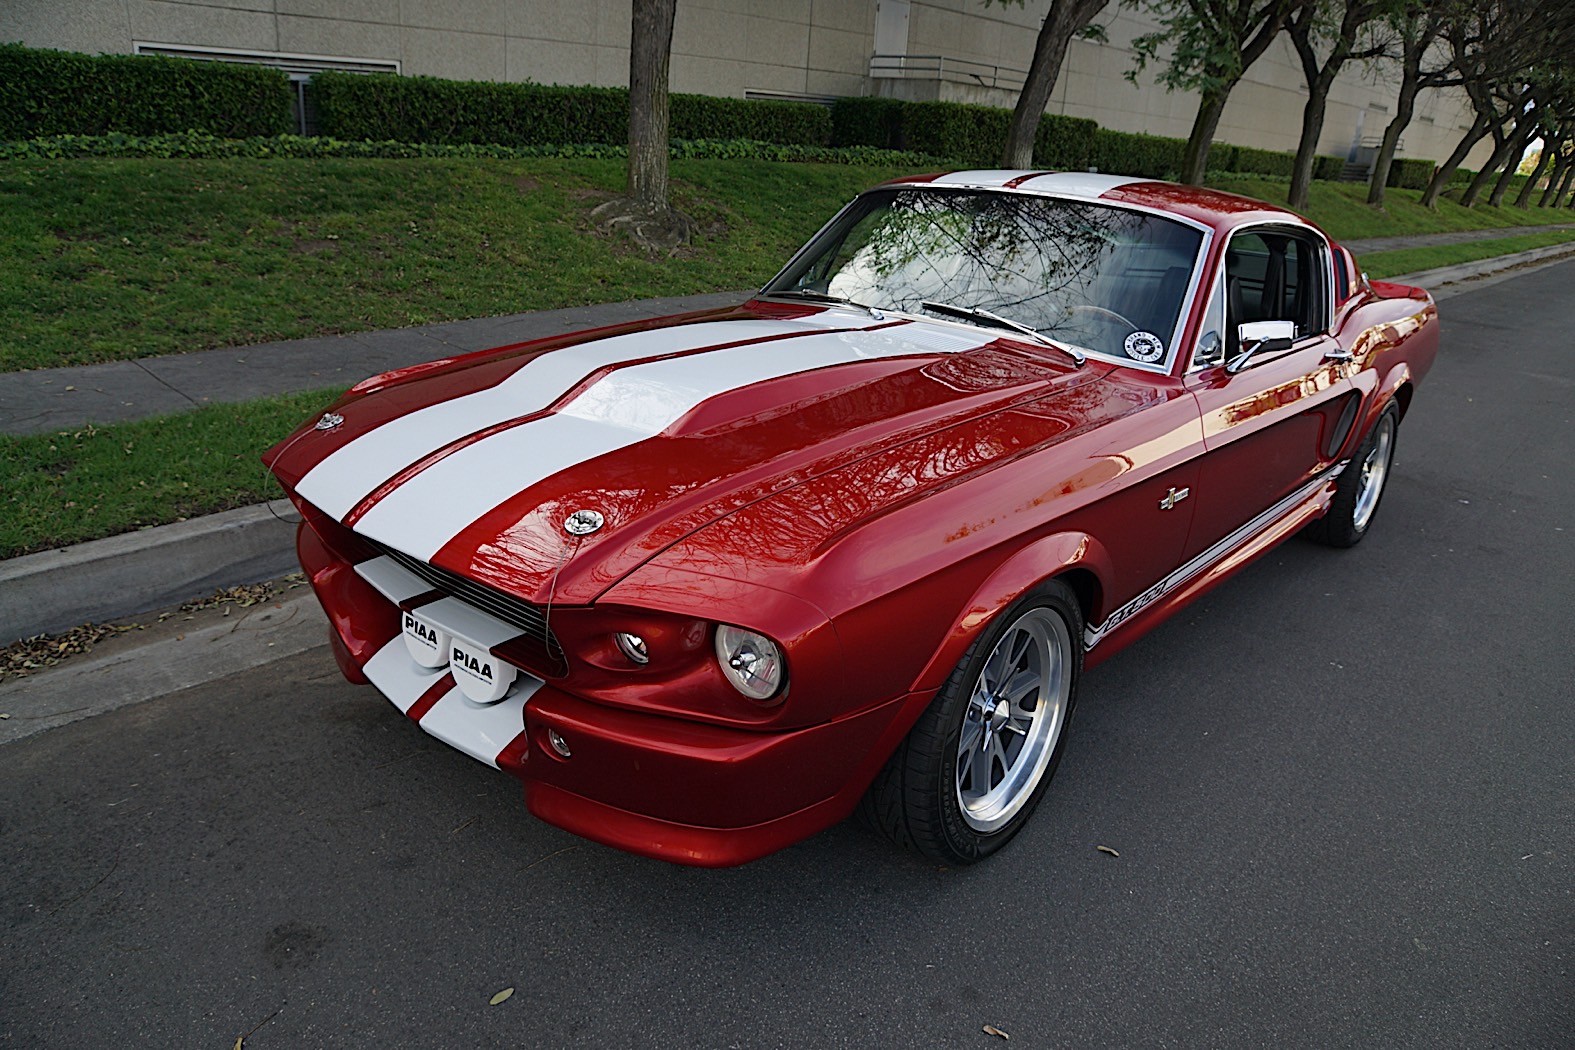 1968 Ford Mustang Eleanor Tribute Is About as Cool as the Original ...